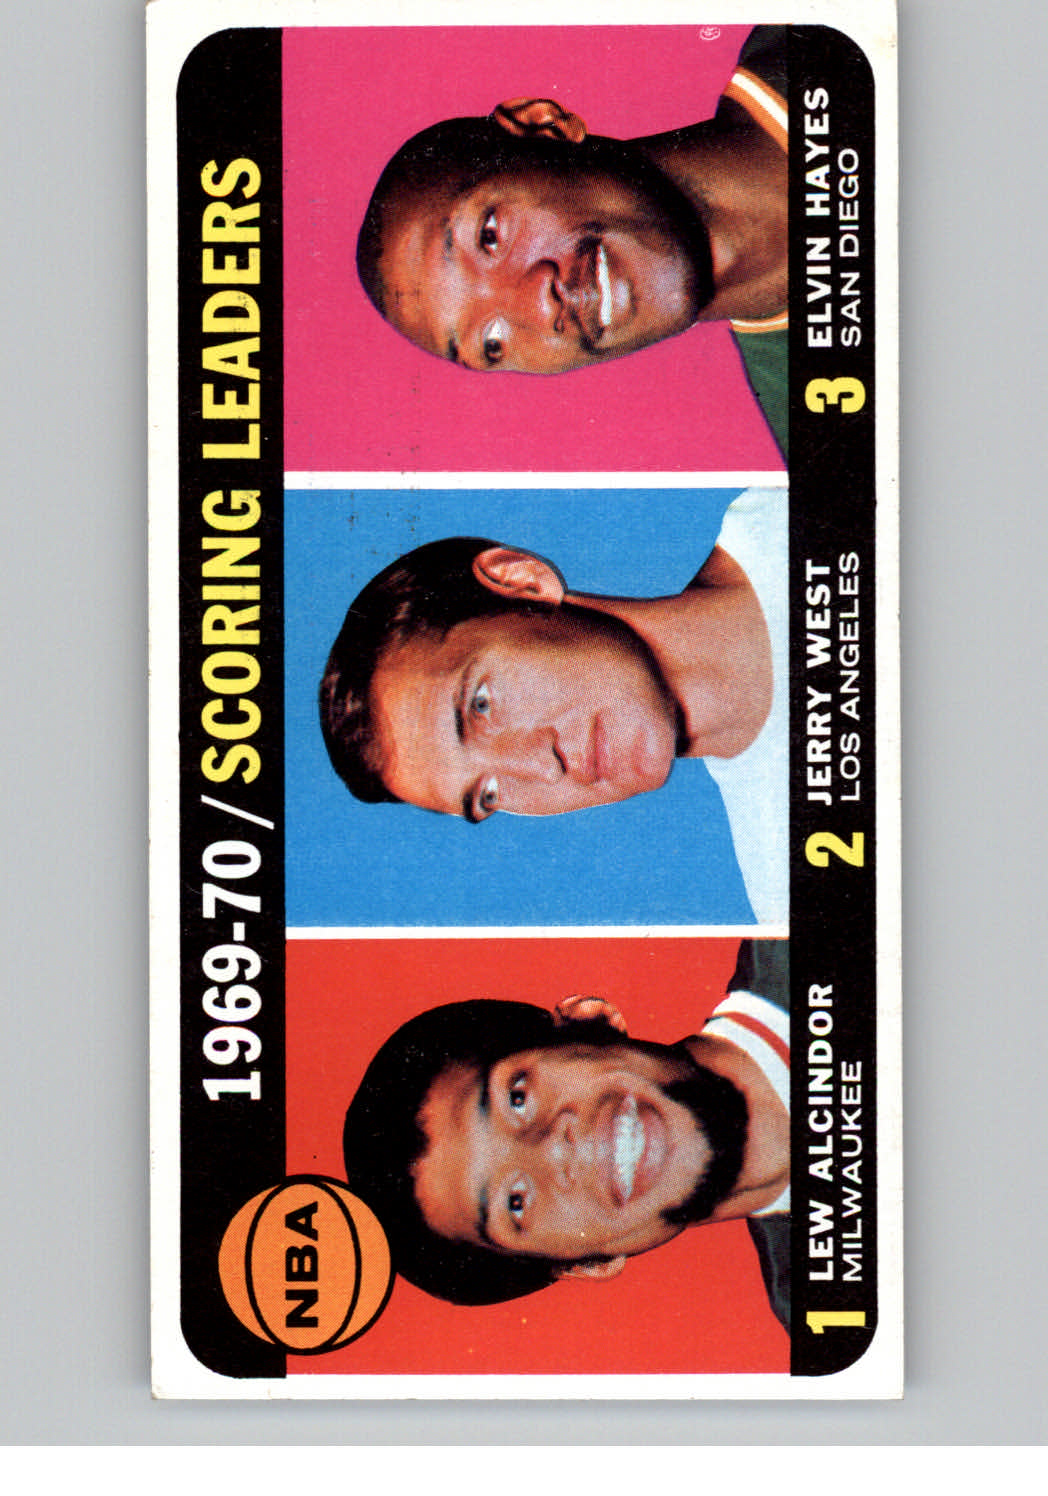 1970-71 Topps #1 Lew Alcindor/Jerry West/Elvin Hayes LL